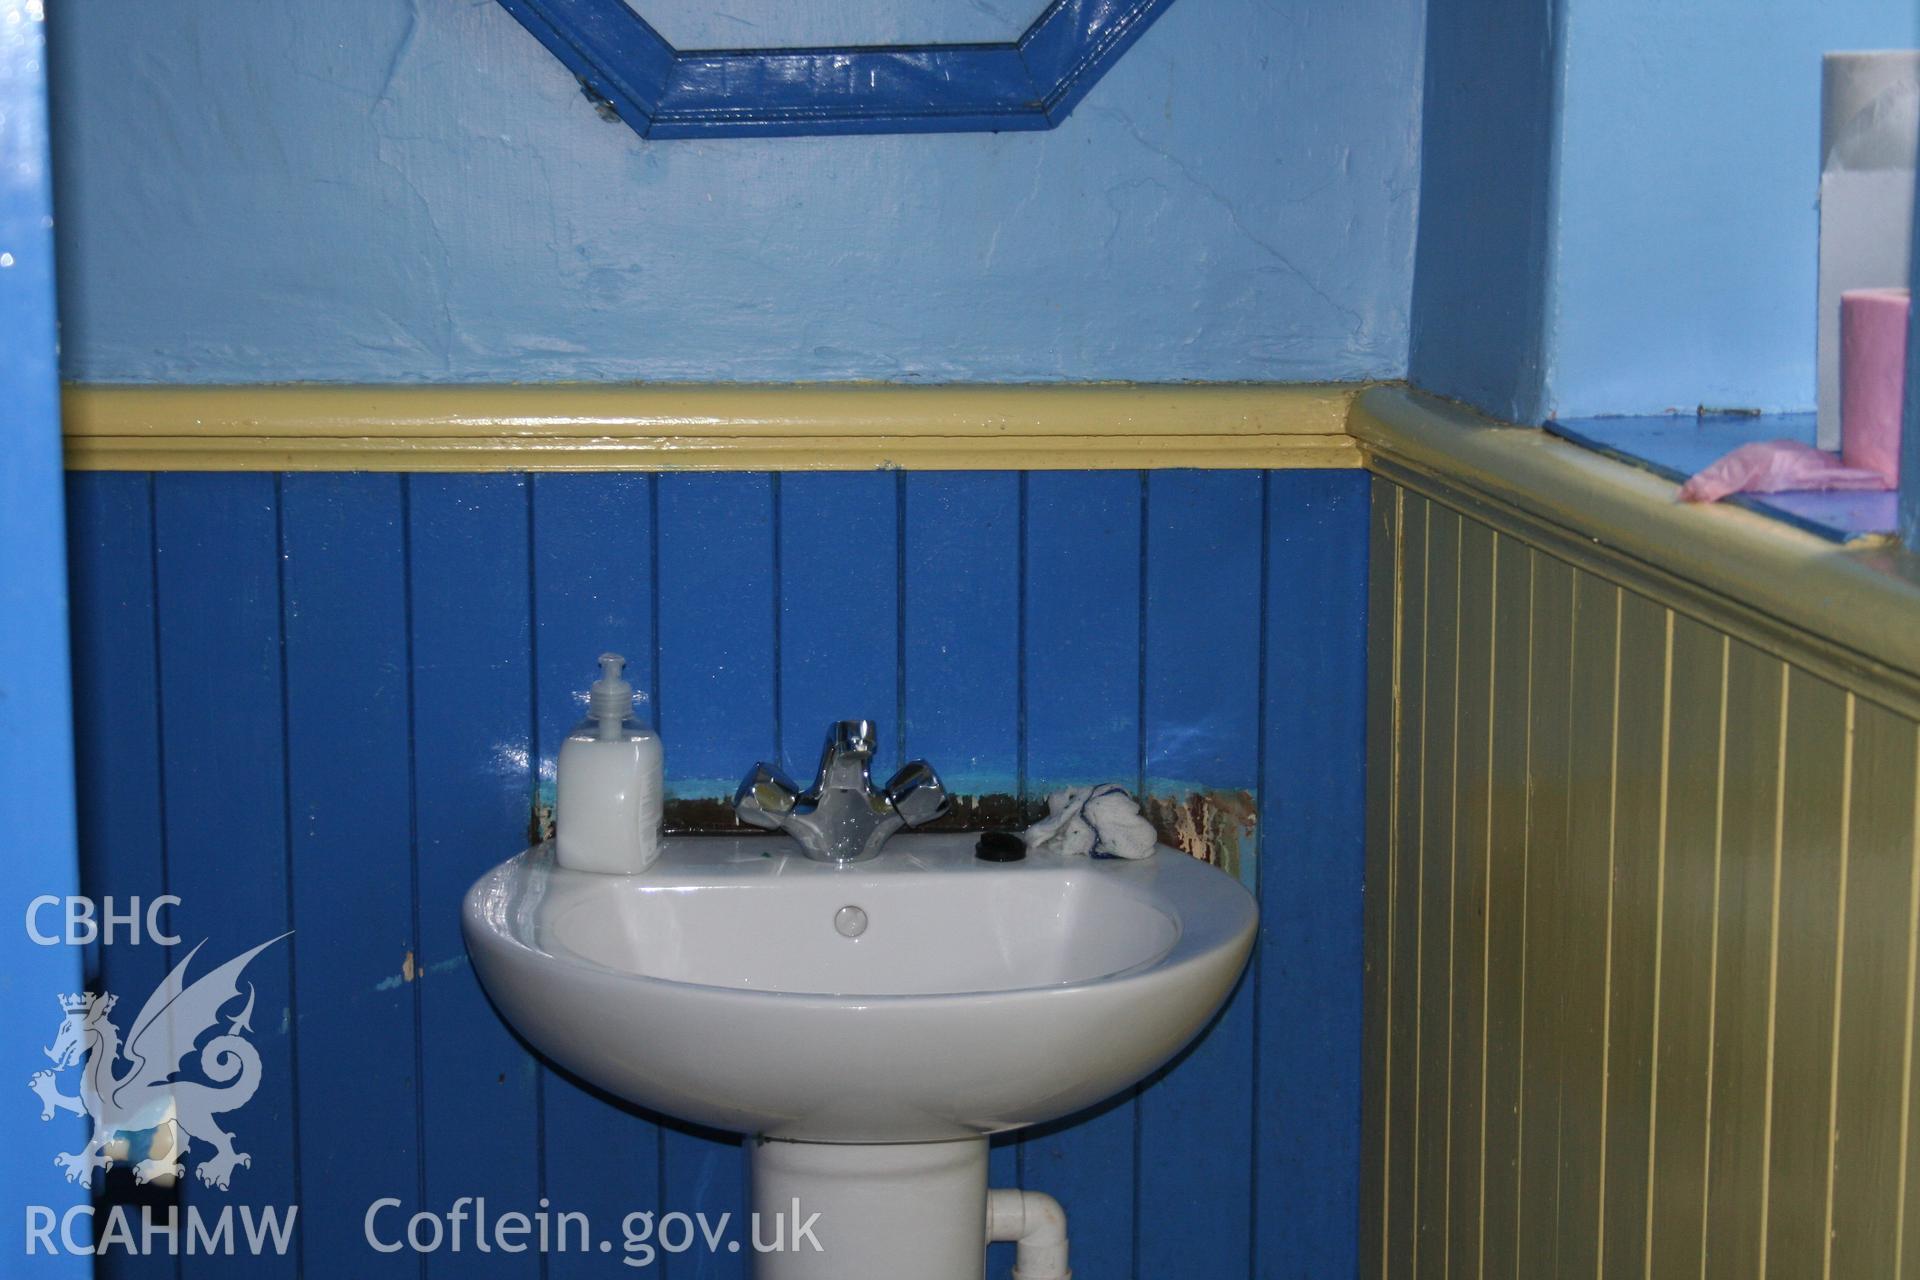 Hanbury Road baptist chapel, Bargoed, digital colour photograph showing bathroom, received in the course of Emergency Recording case ref no RCS2/1/2247.